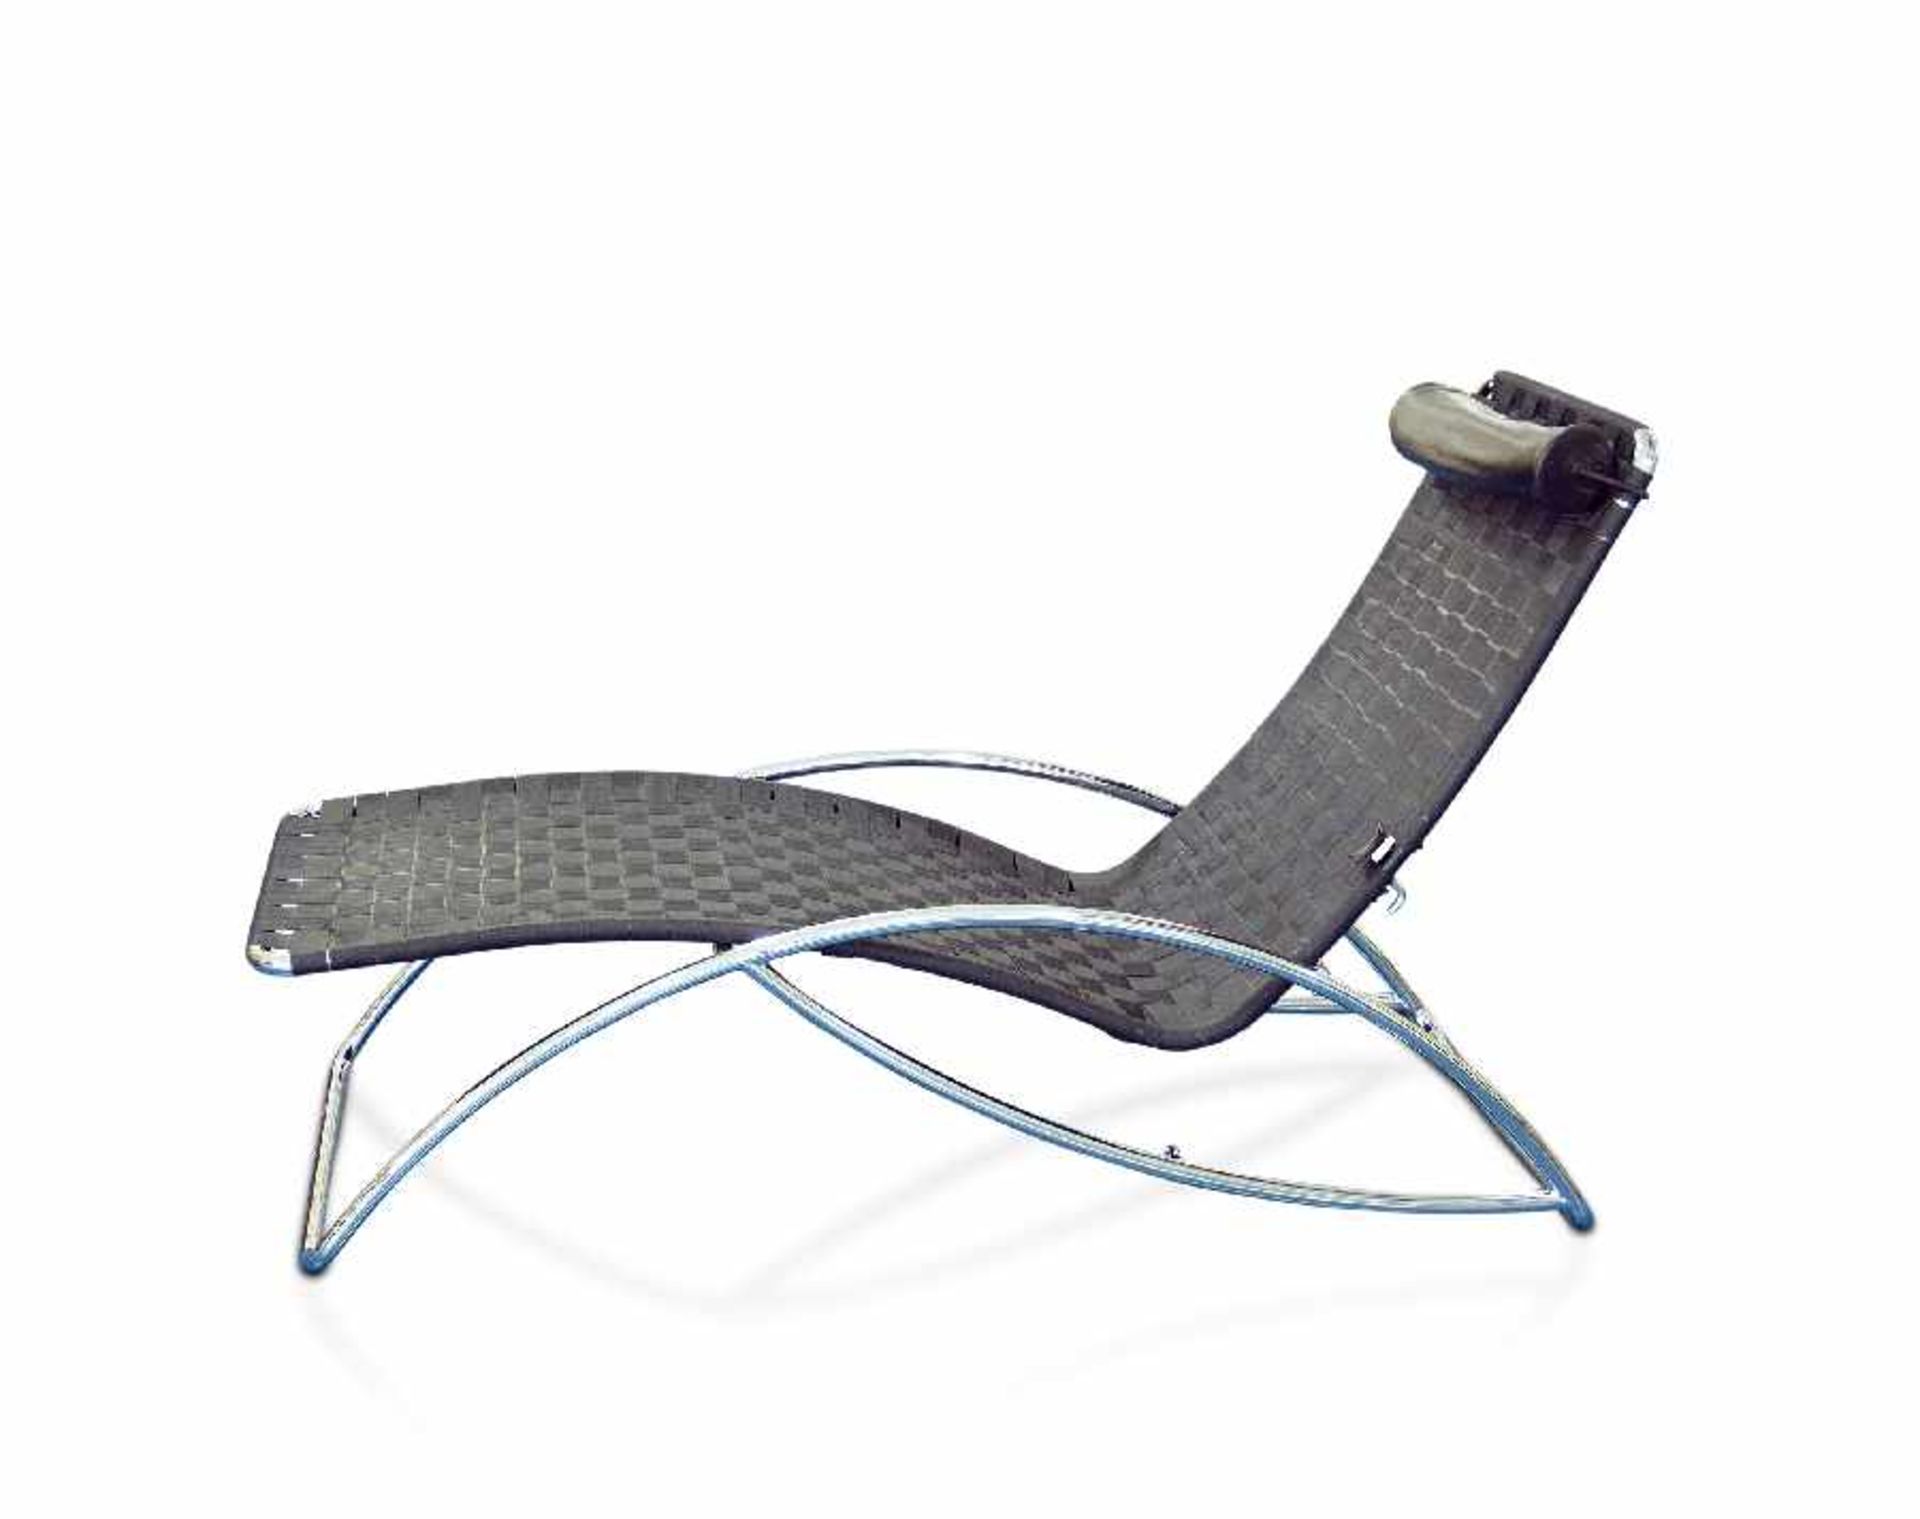 ThonetLounger S828Steel tube with fabric and leather headrest; H 95 cm, W 62 cm, L 170 cm; to use as